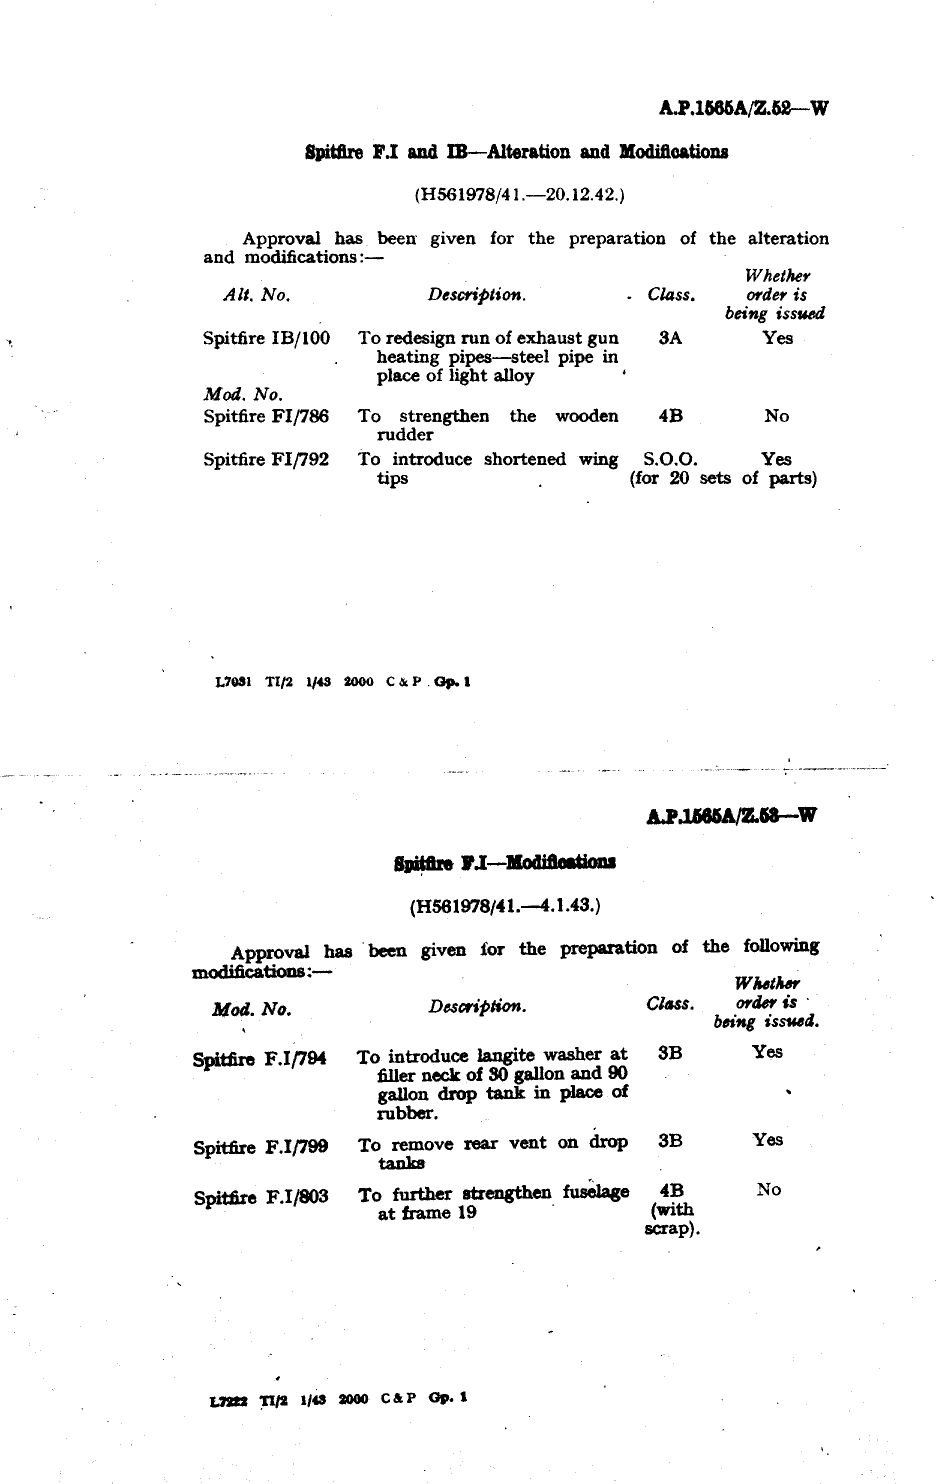 Sample page 1 from AirCorps Library document: Spitfire F.I and IB Alteration and Modifications 100, 786, and 792